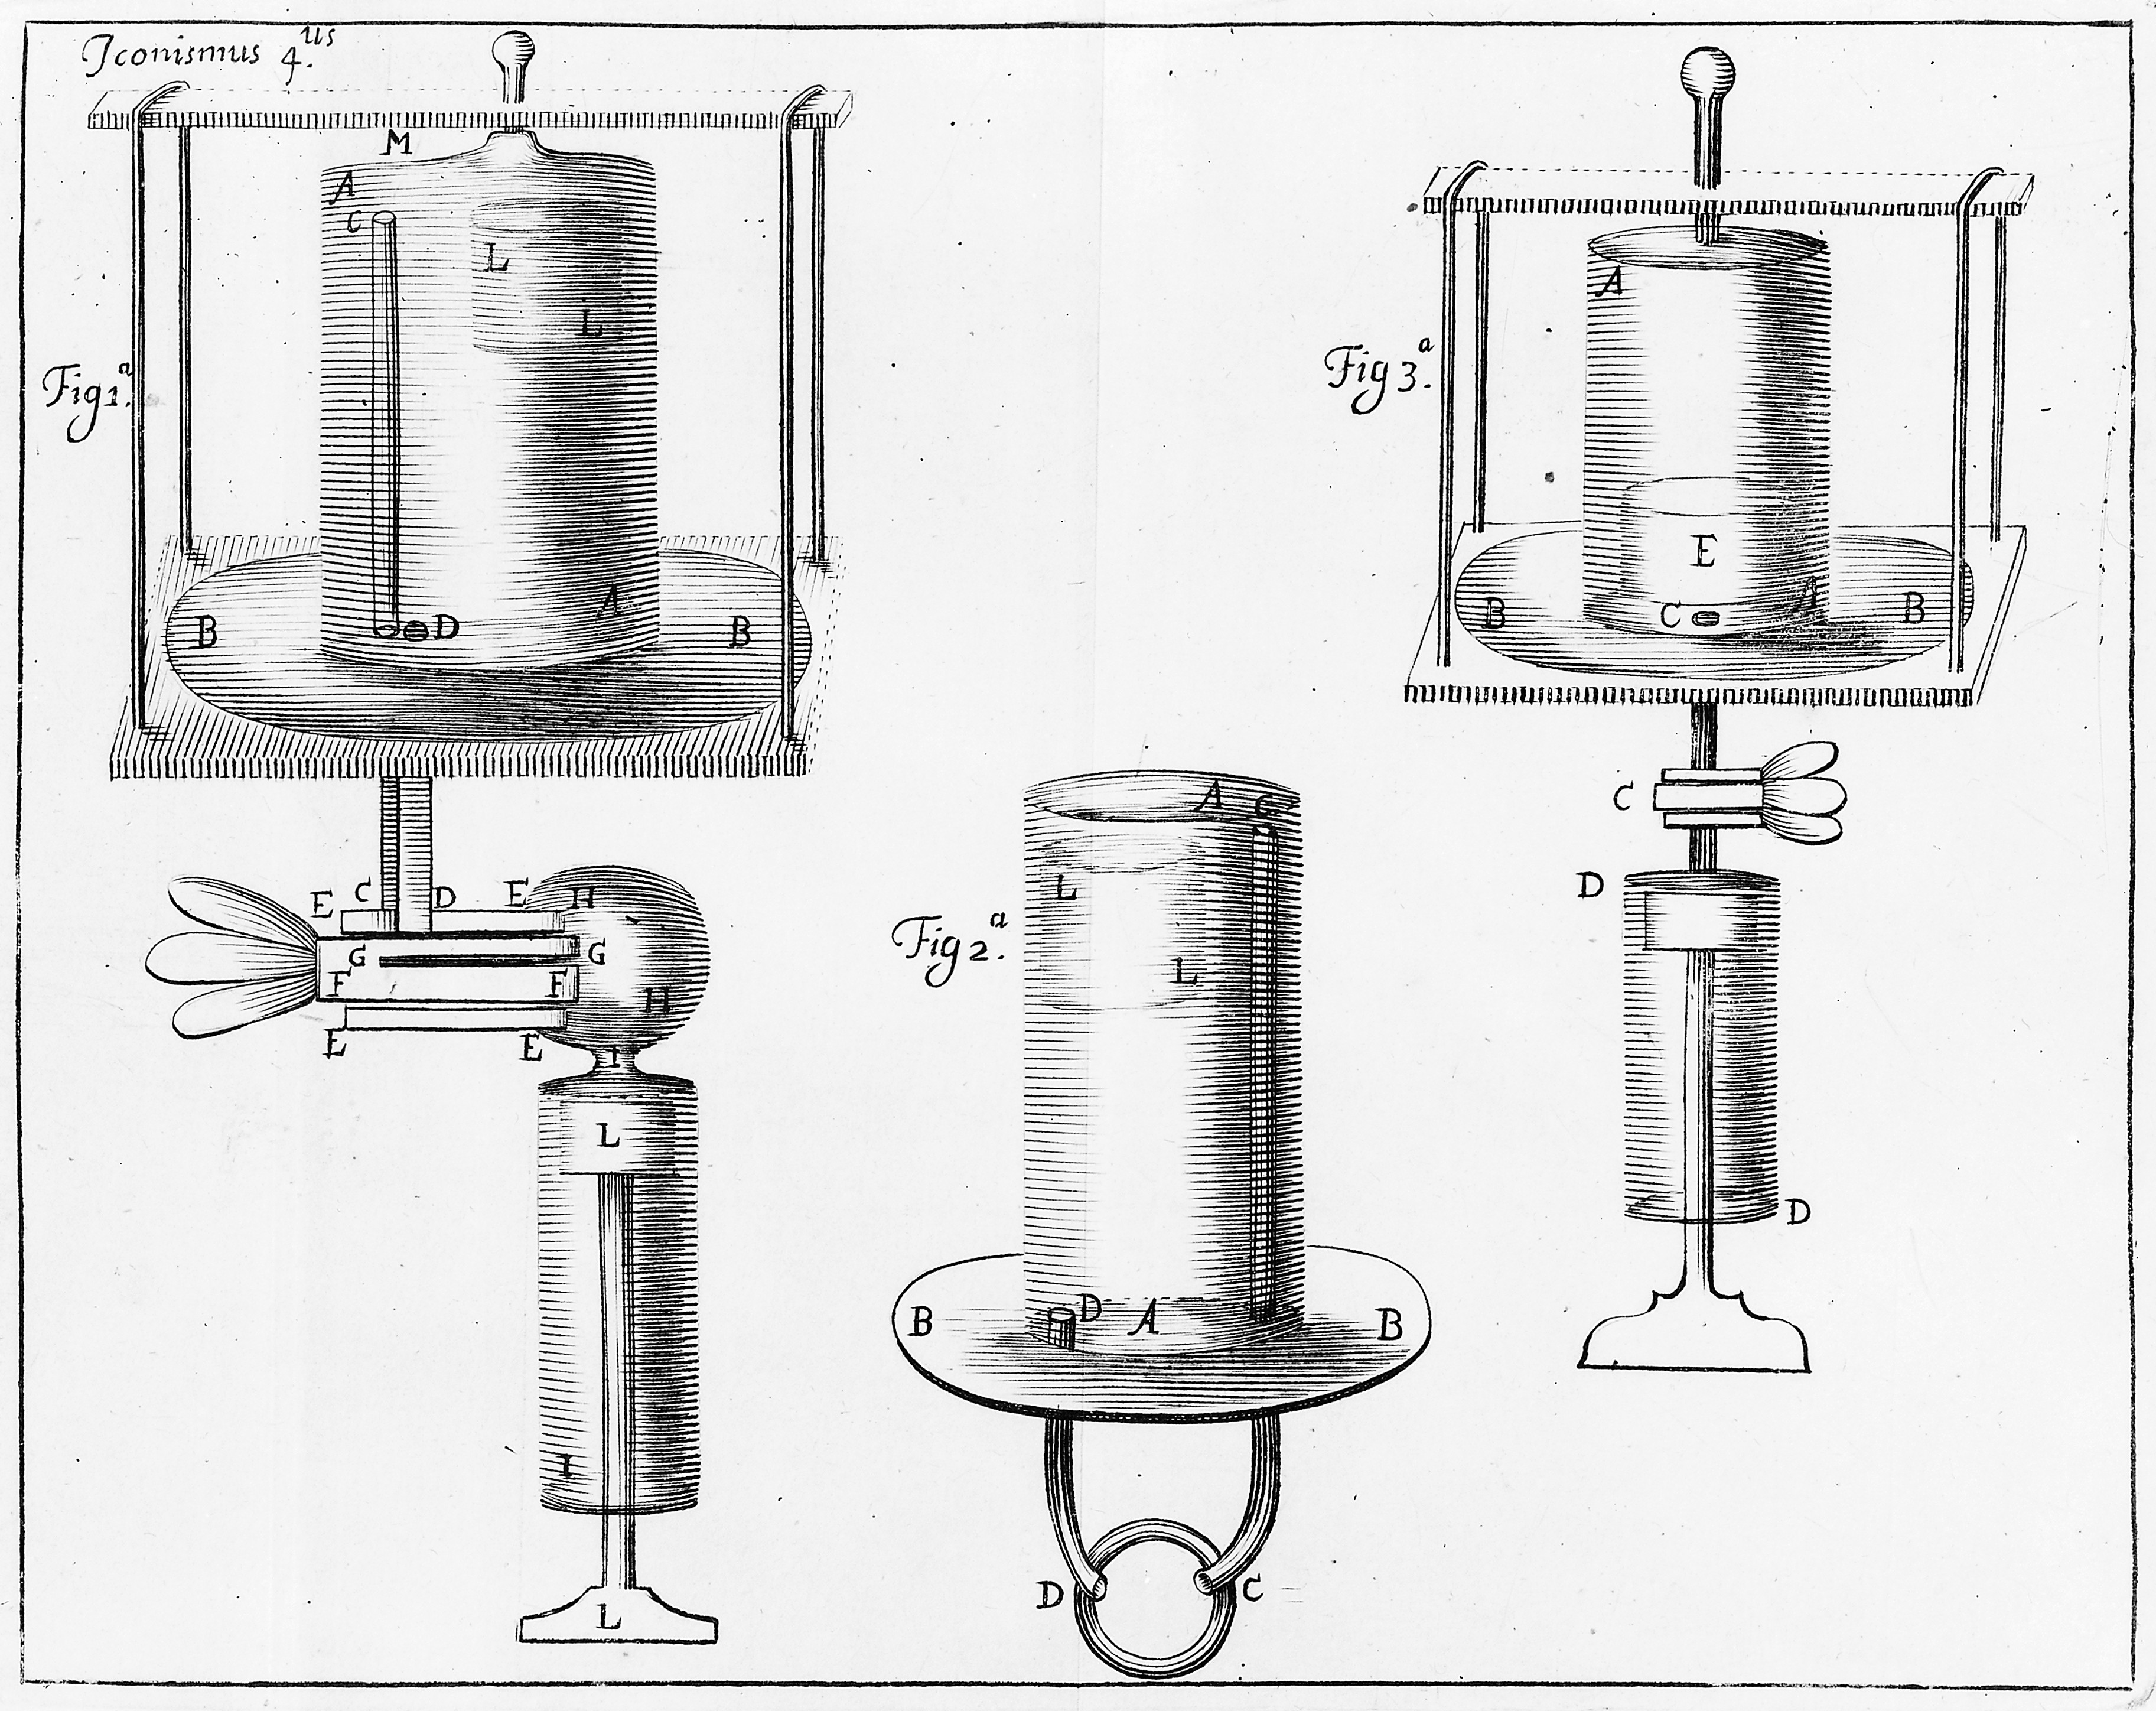 Robert_Boyle's_Apparatus_for_filtering_air_through_water_Wellcome_M0014709.jpg